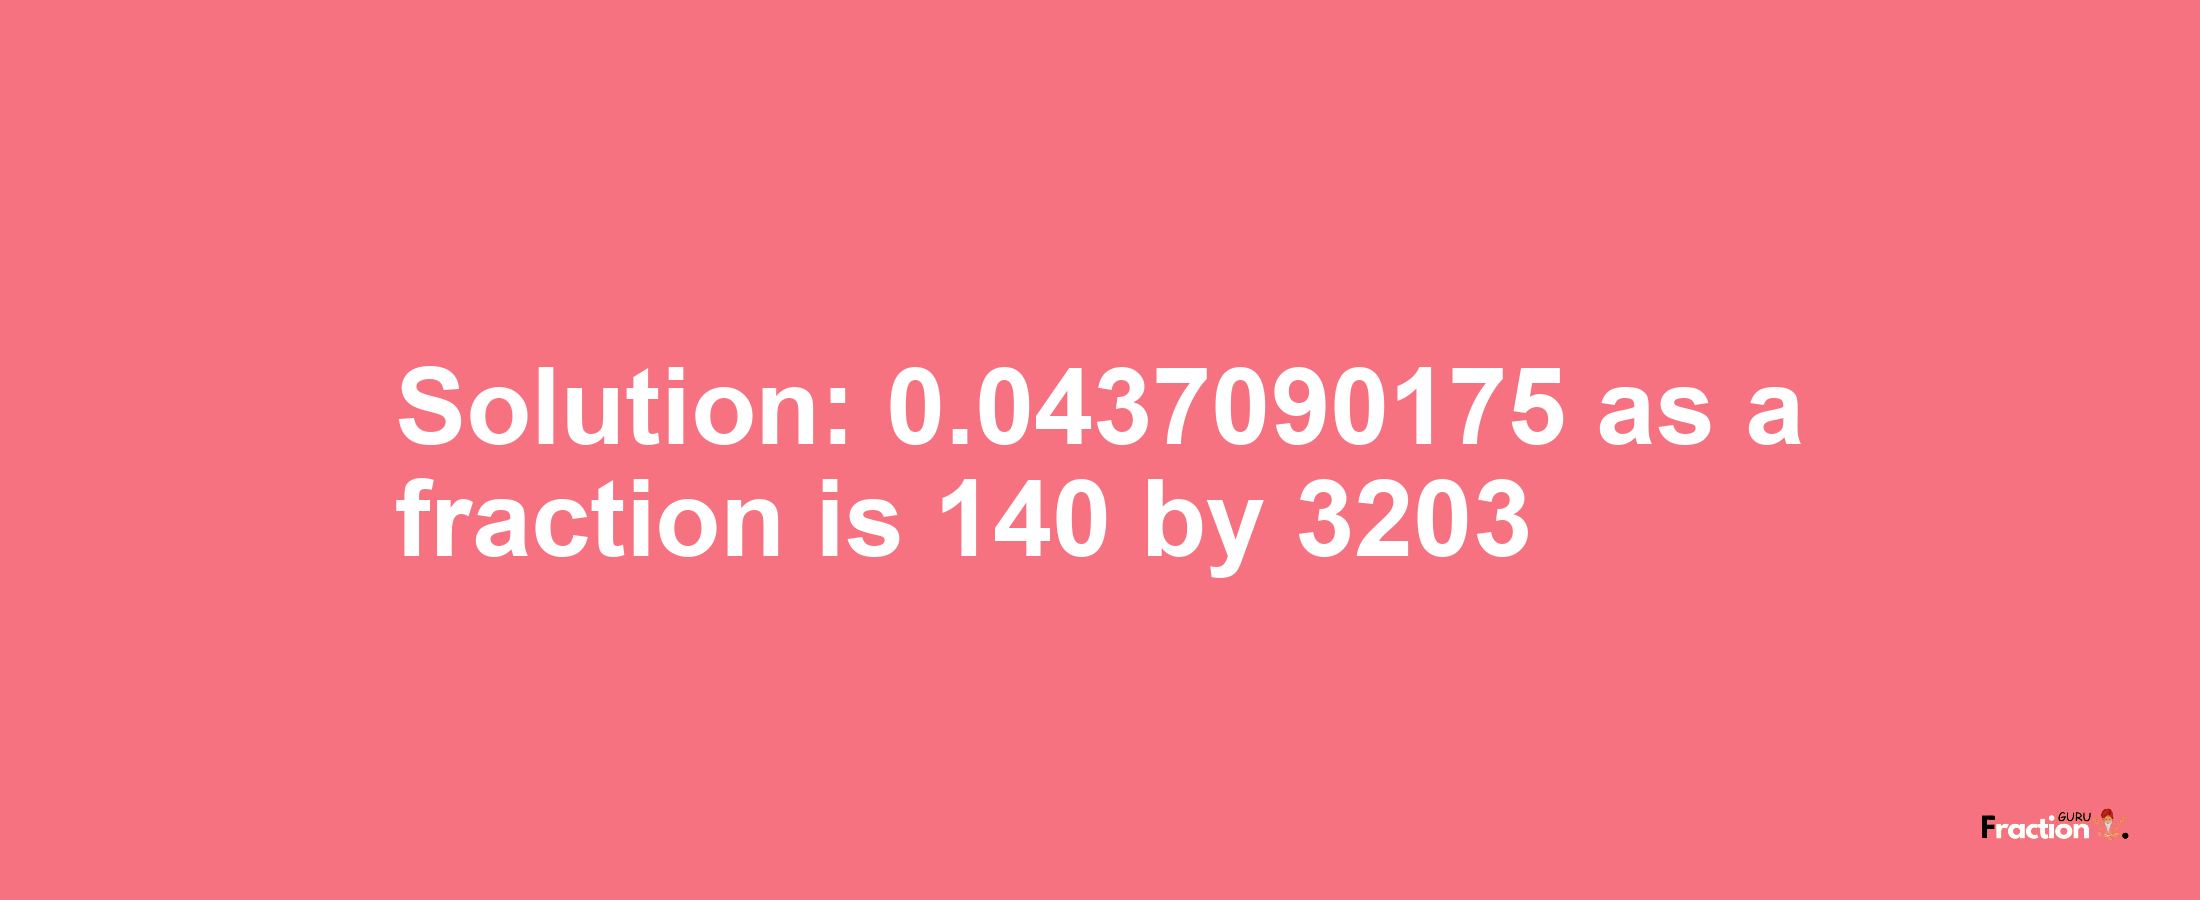 Solution:0.0437090175 as a fraction is 140/3203